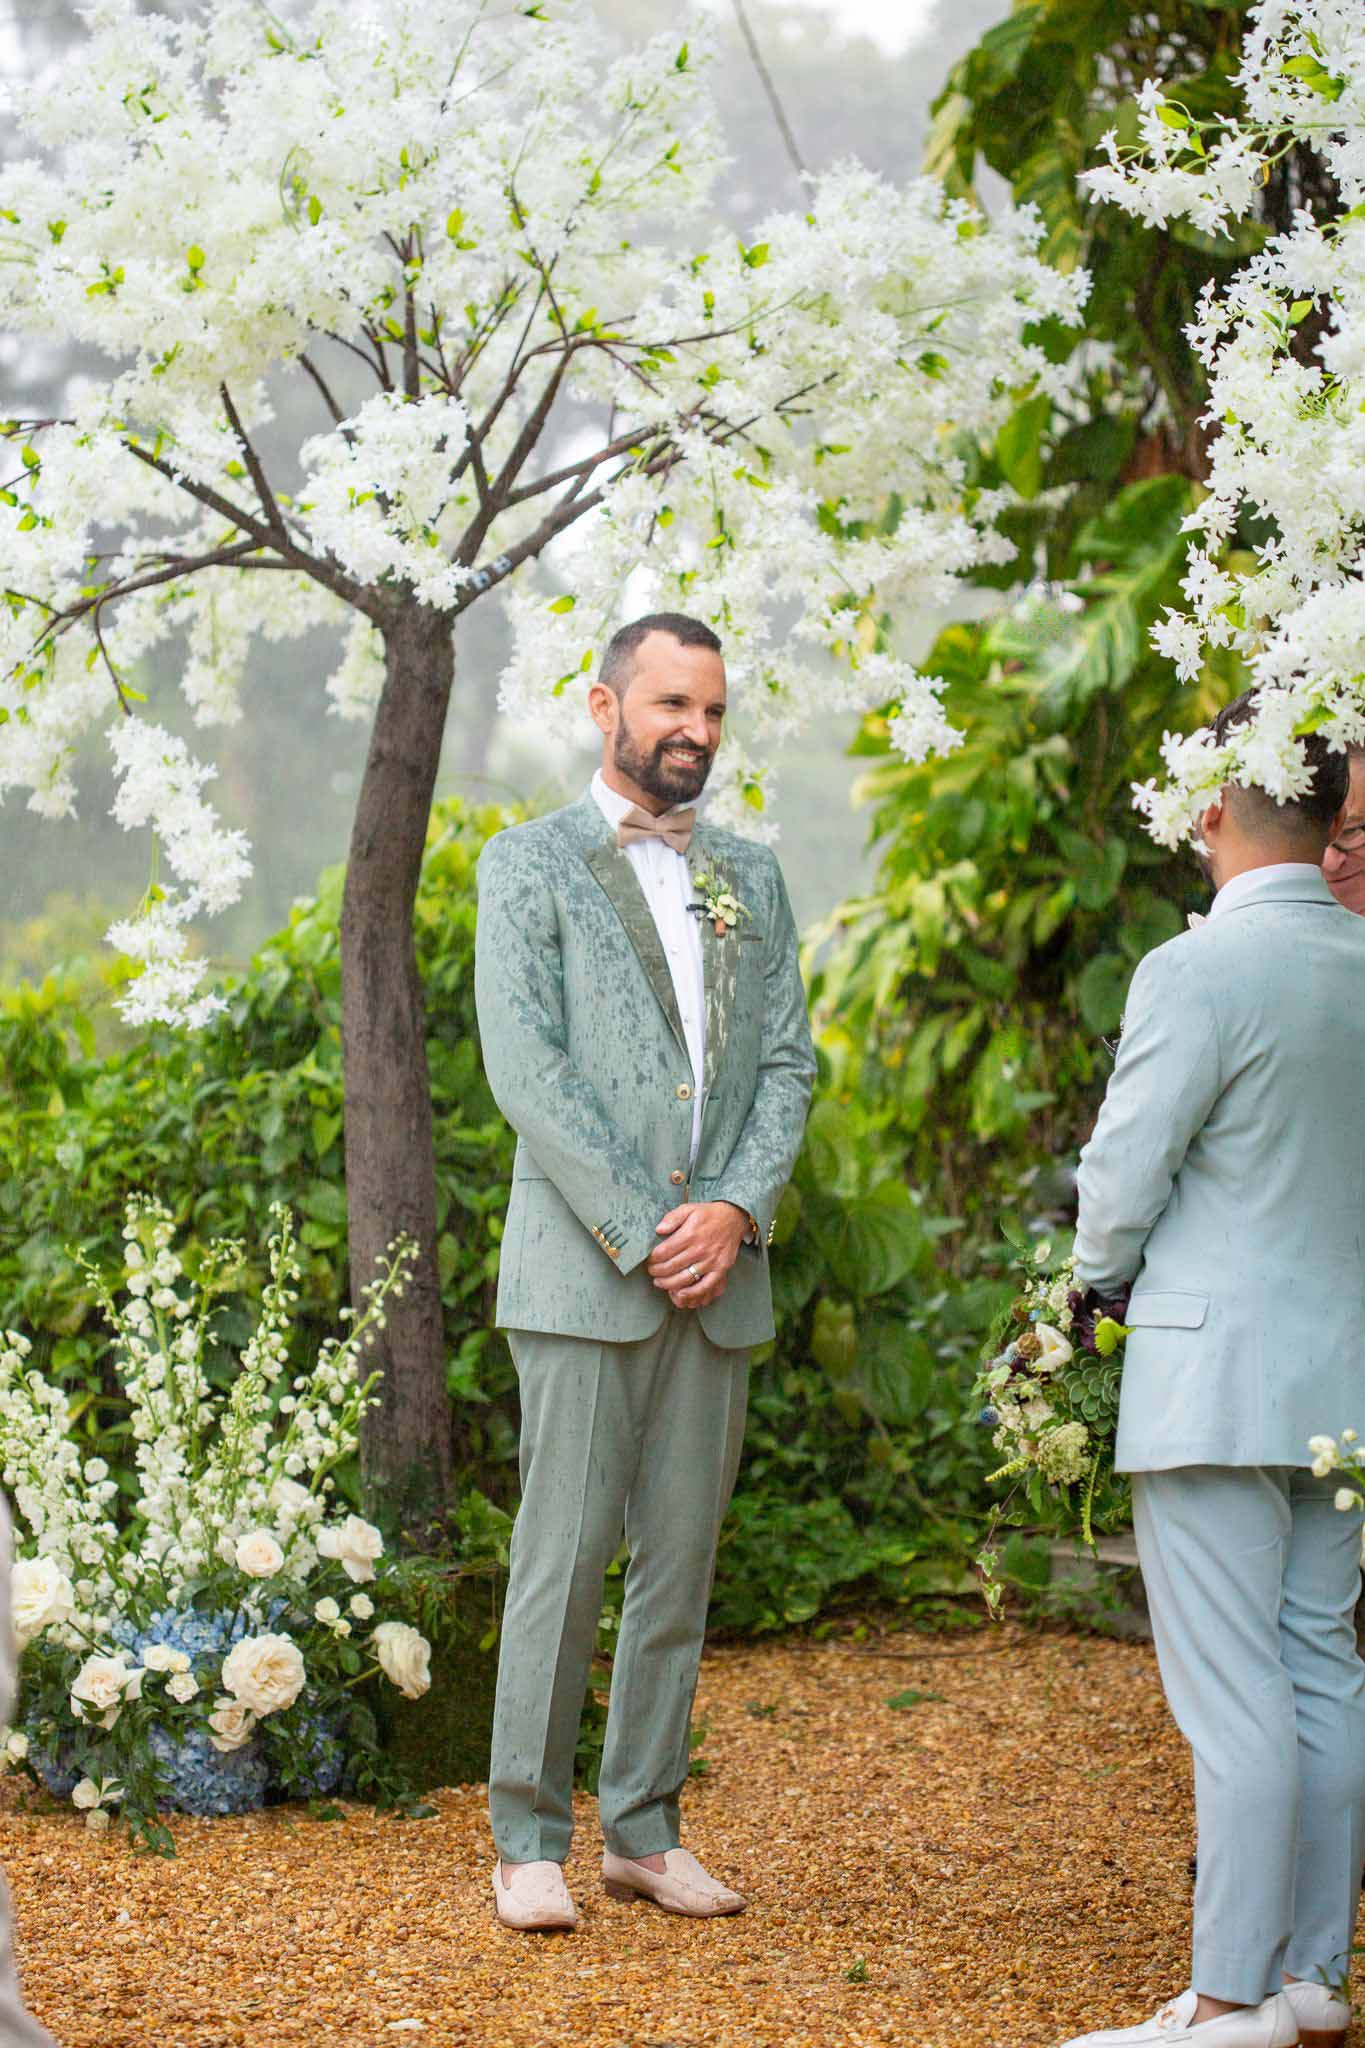 two grooms at their outdoor wedding altar surrounded by white flowers